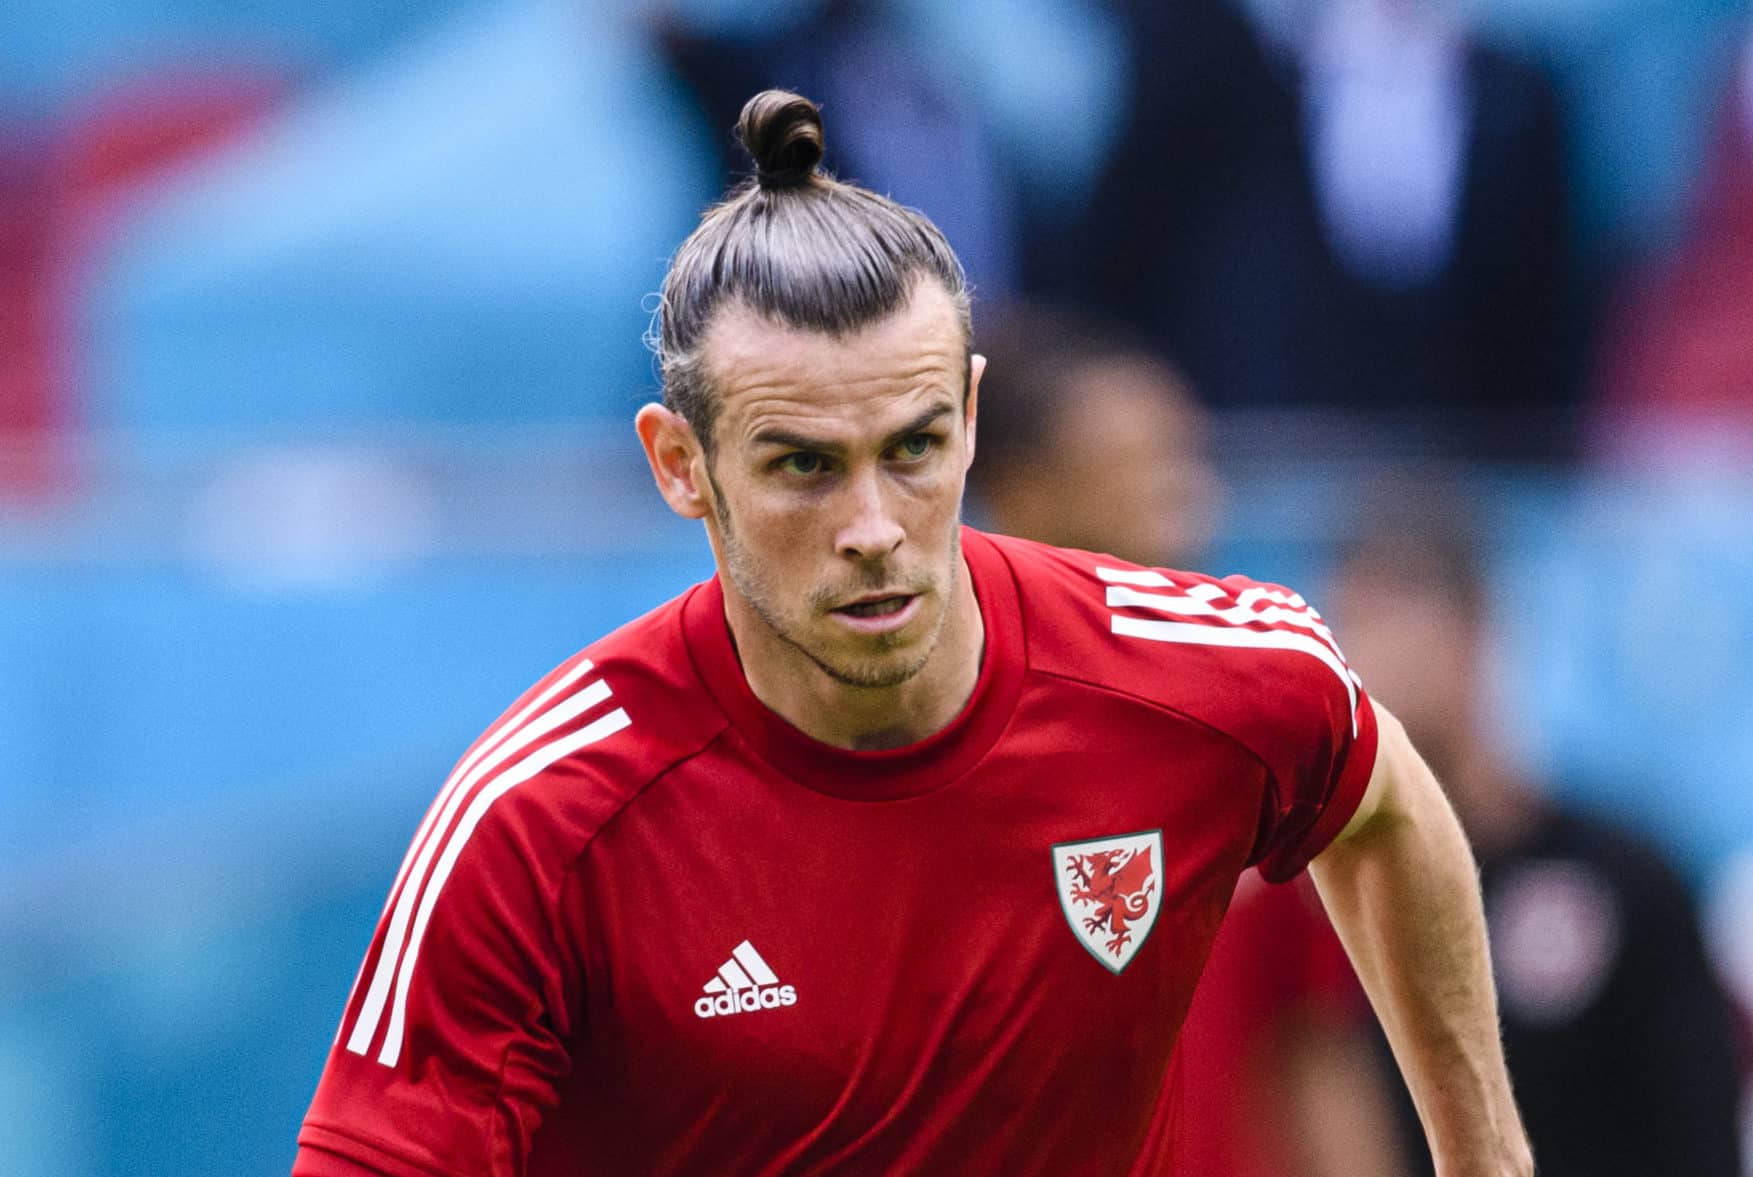 What's behind the Spurs shirt switches for Gareth Bale? - BBC Sport